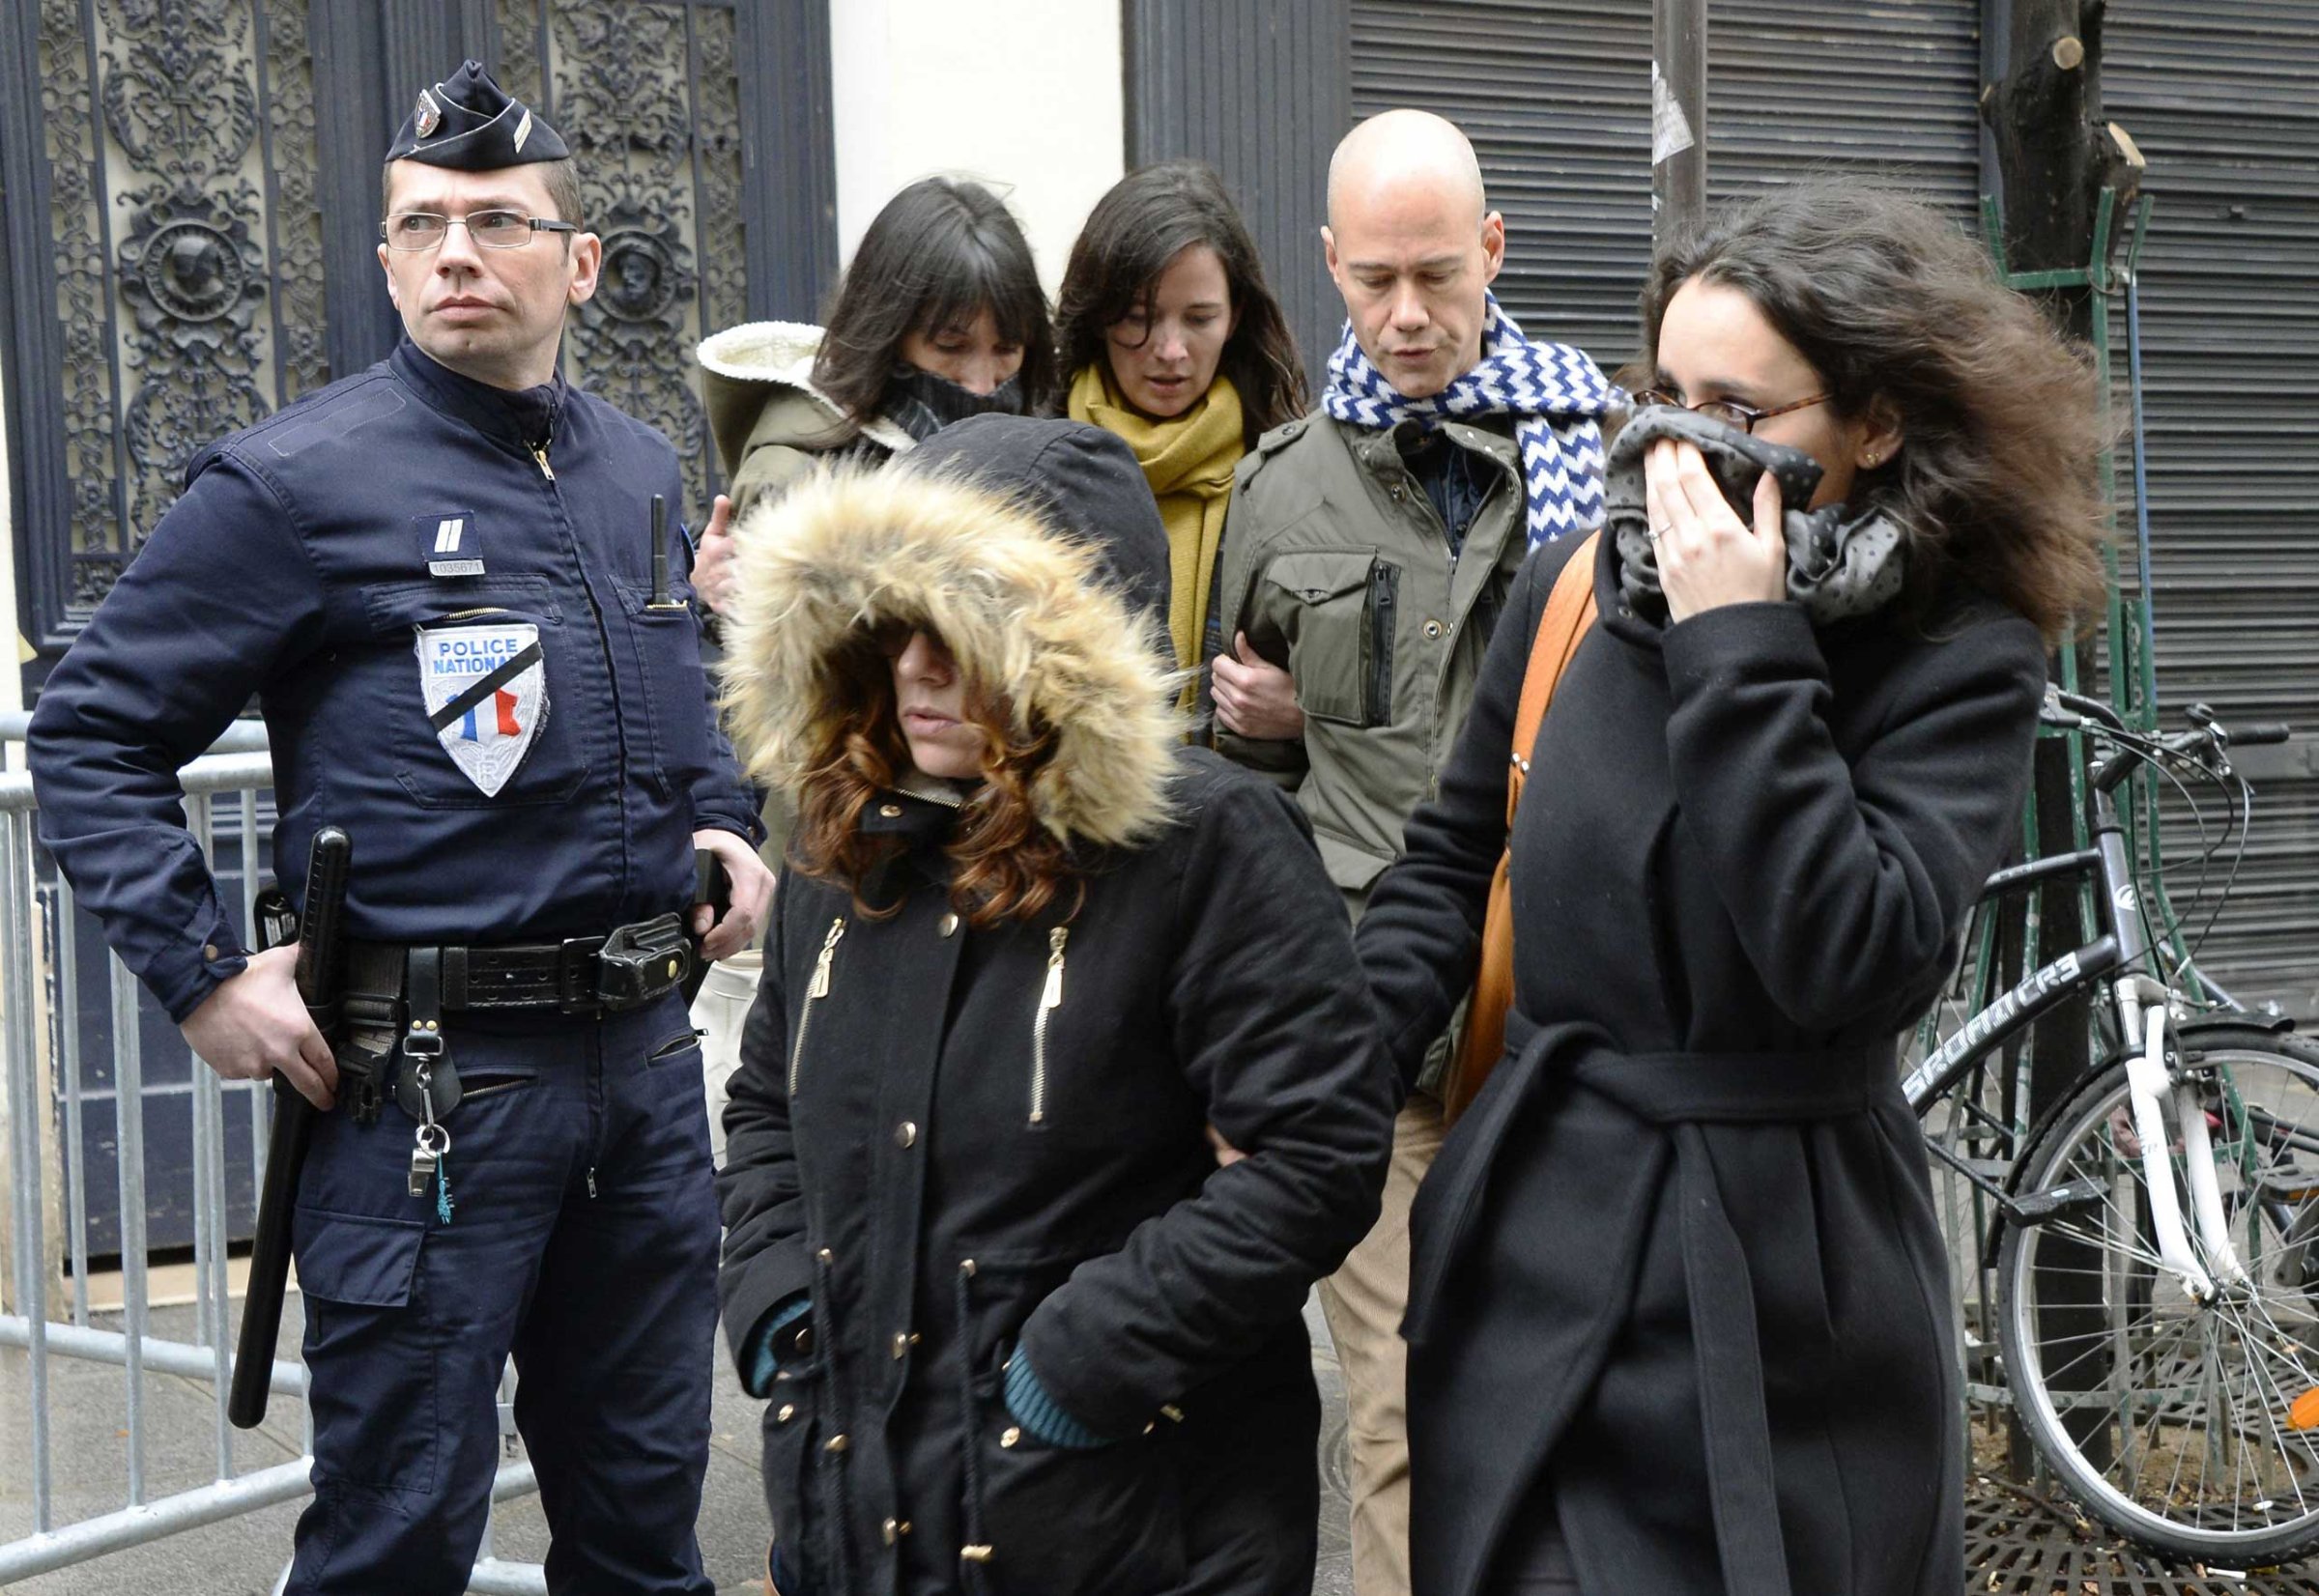 Staff arrive to attend an editorial meeting of French satirical weekly newspaper Charlie Hebdo and Liberation, Jan. 9, 2015 in Paris.